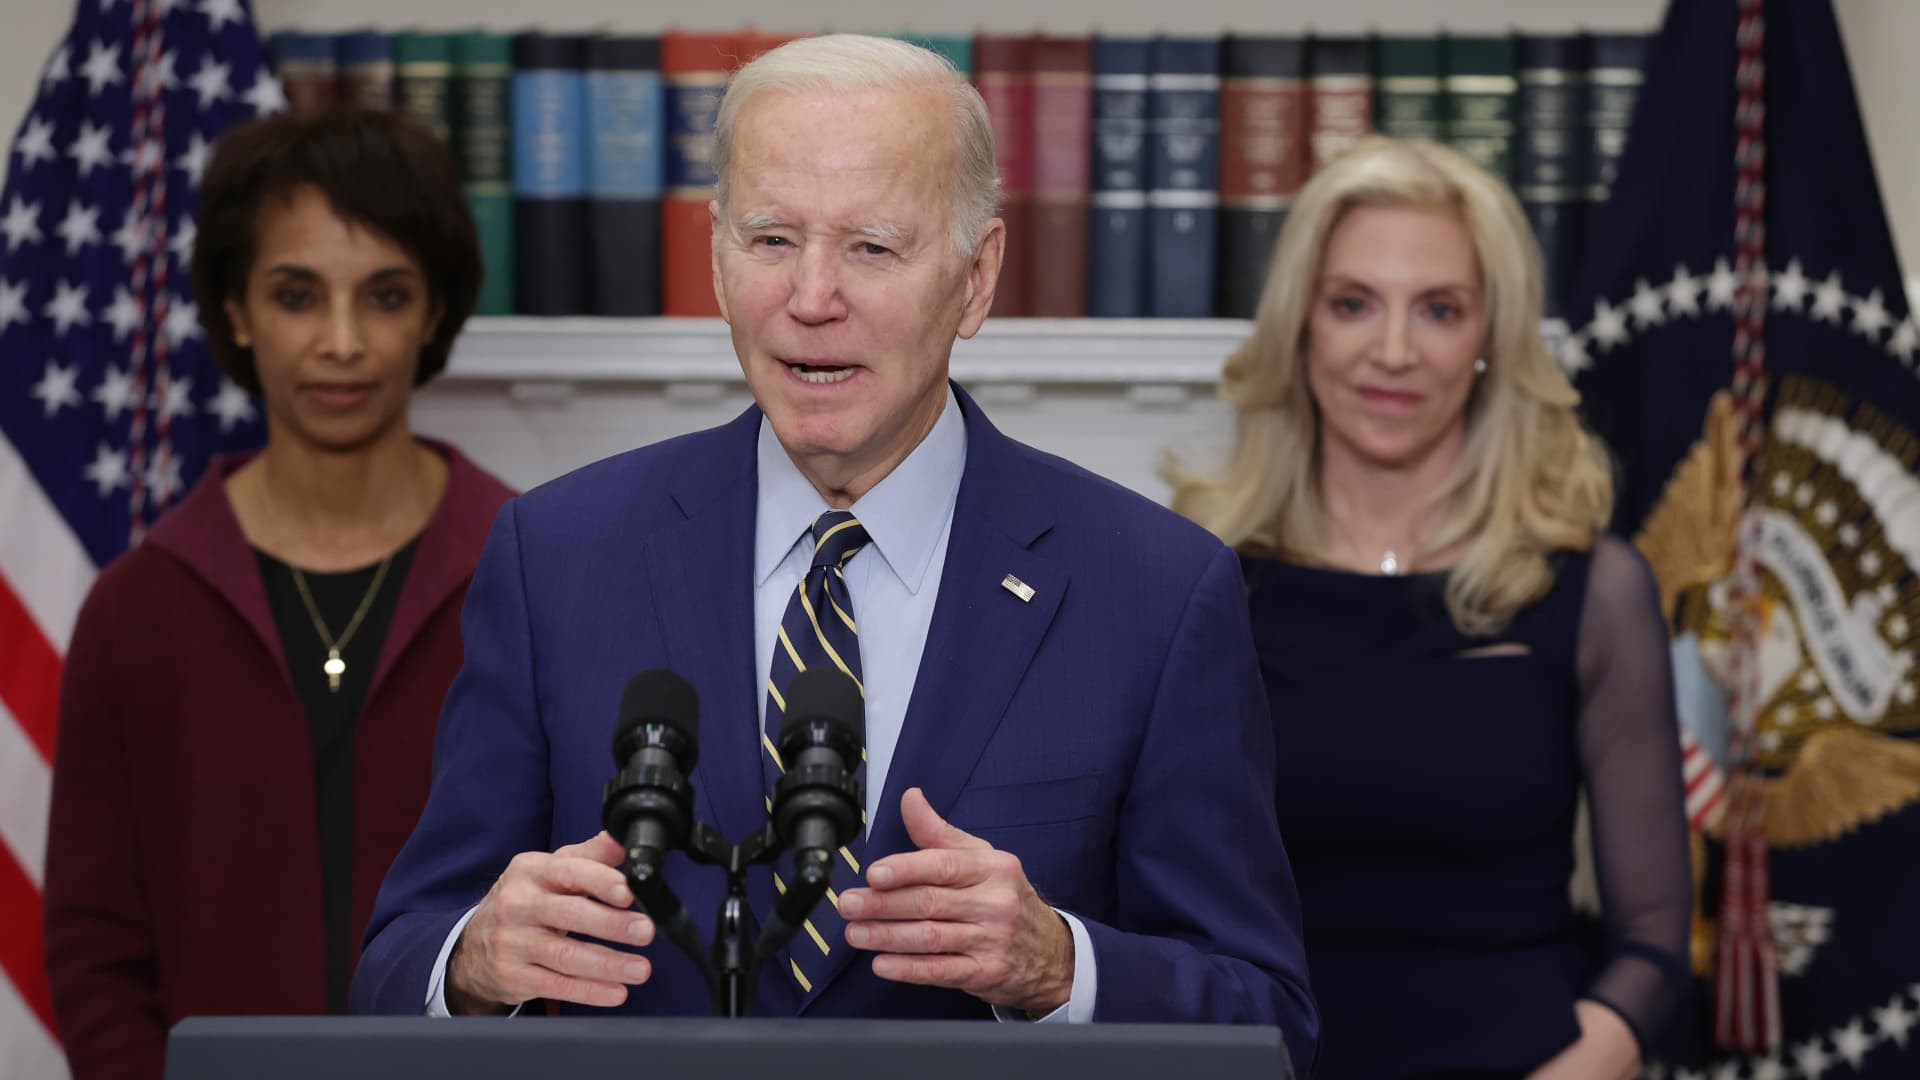 Show me the money: The highest revenue raising taxes in Biden’s proposed budget